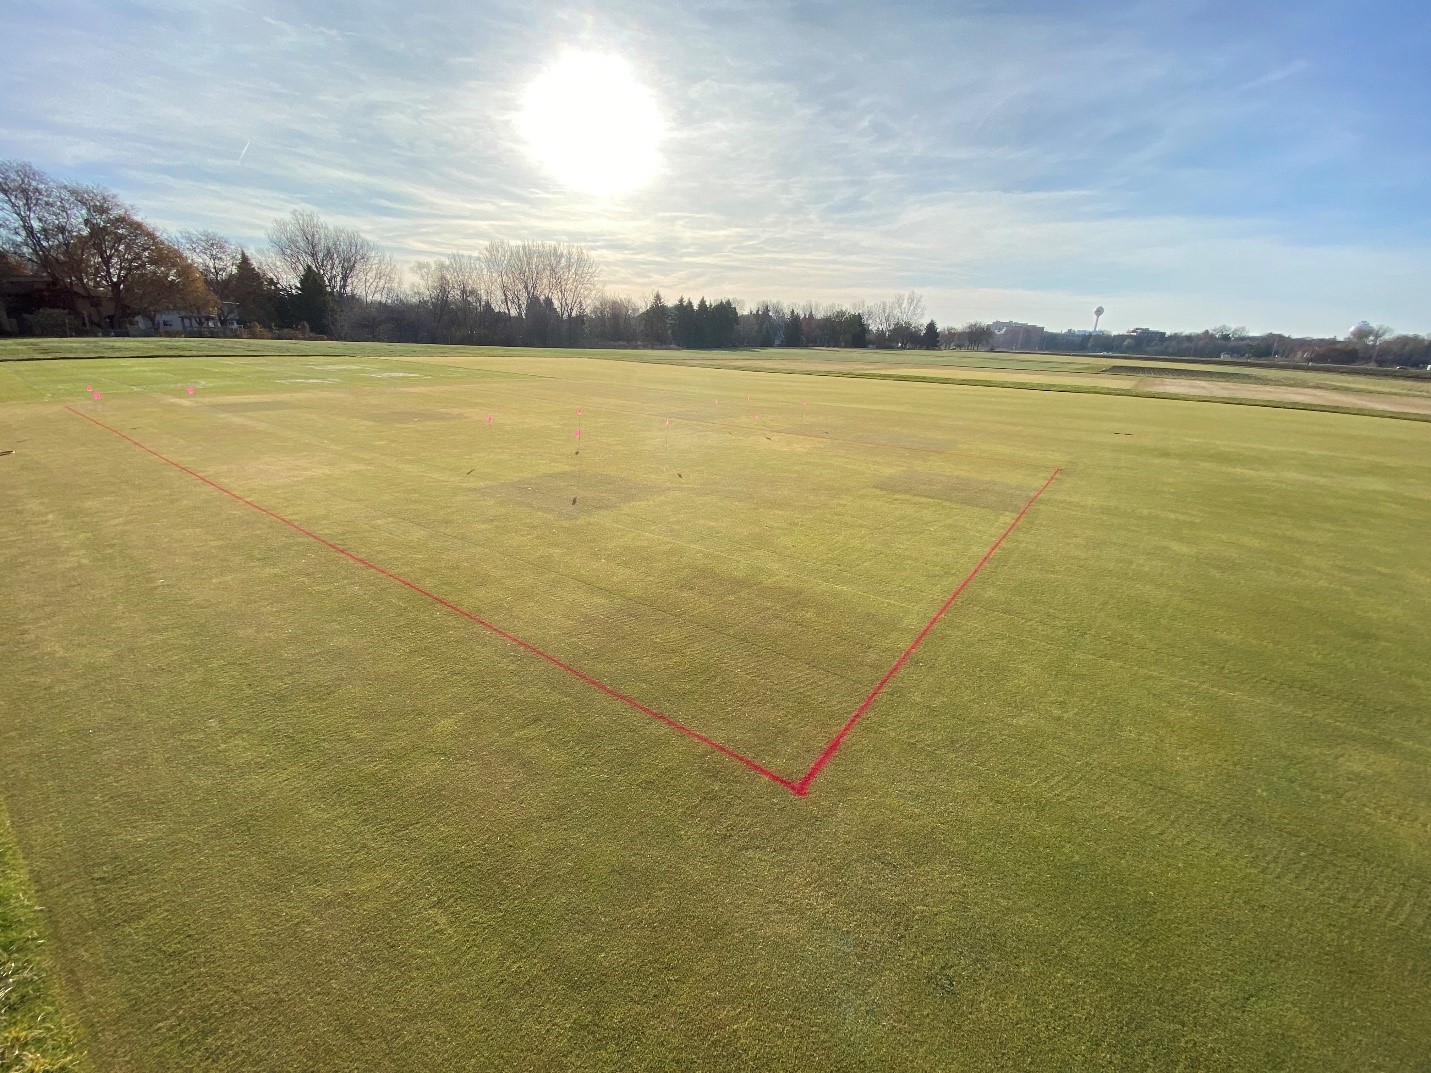 Turfgrass research plots in late fall